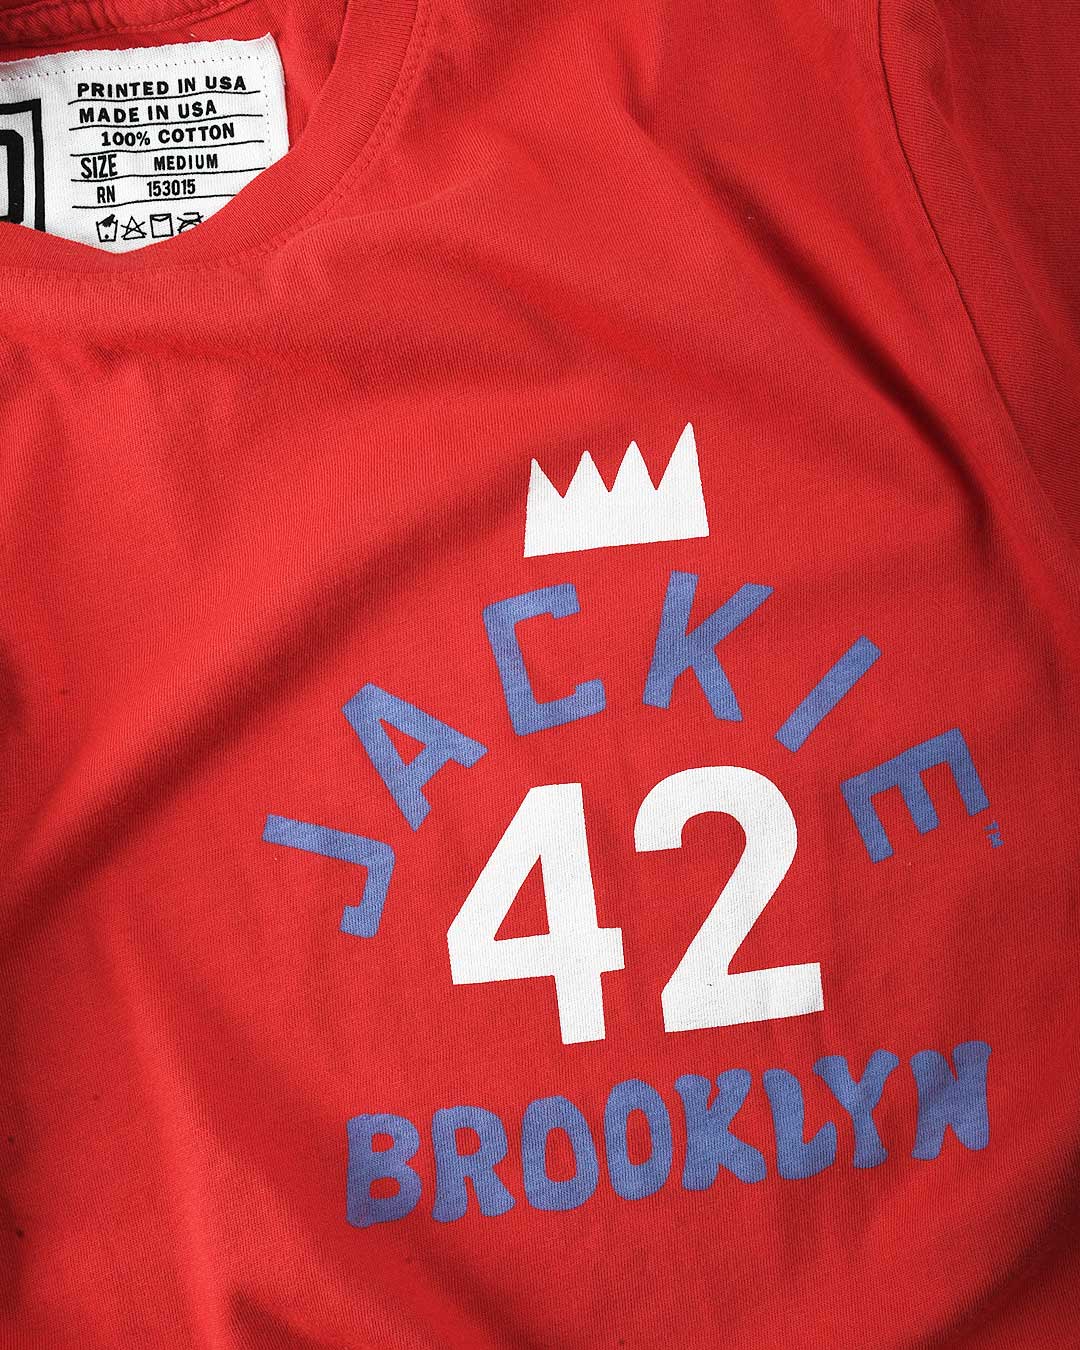 Jackie Robinson #42 Crown Red Tee - Roots of Fight Canada